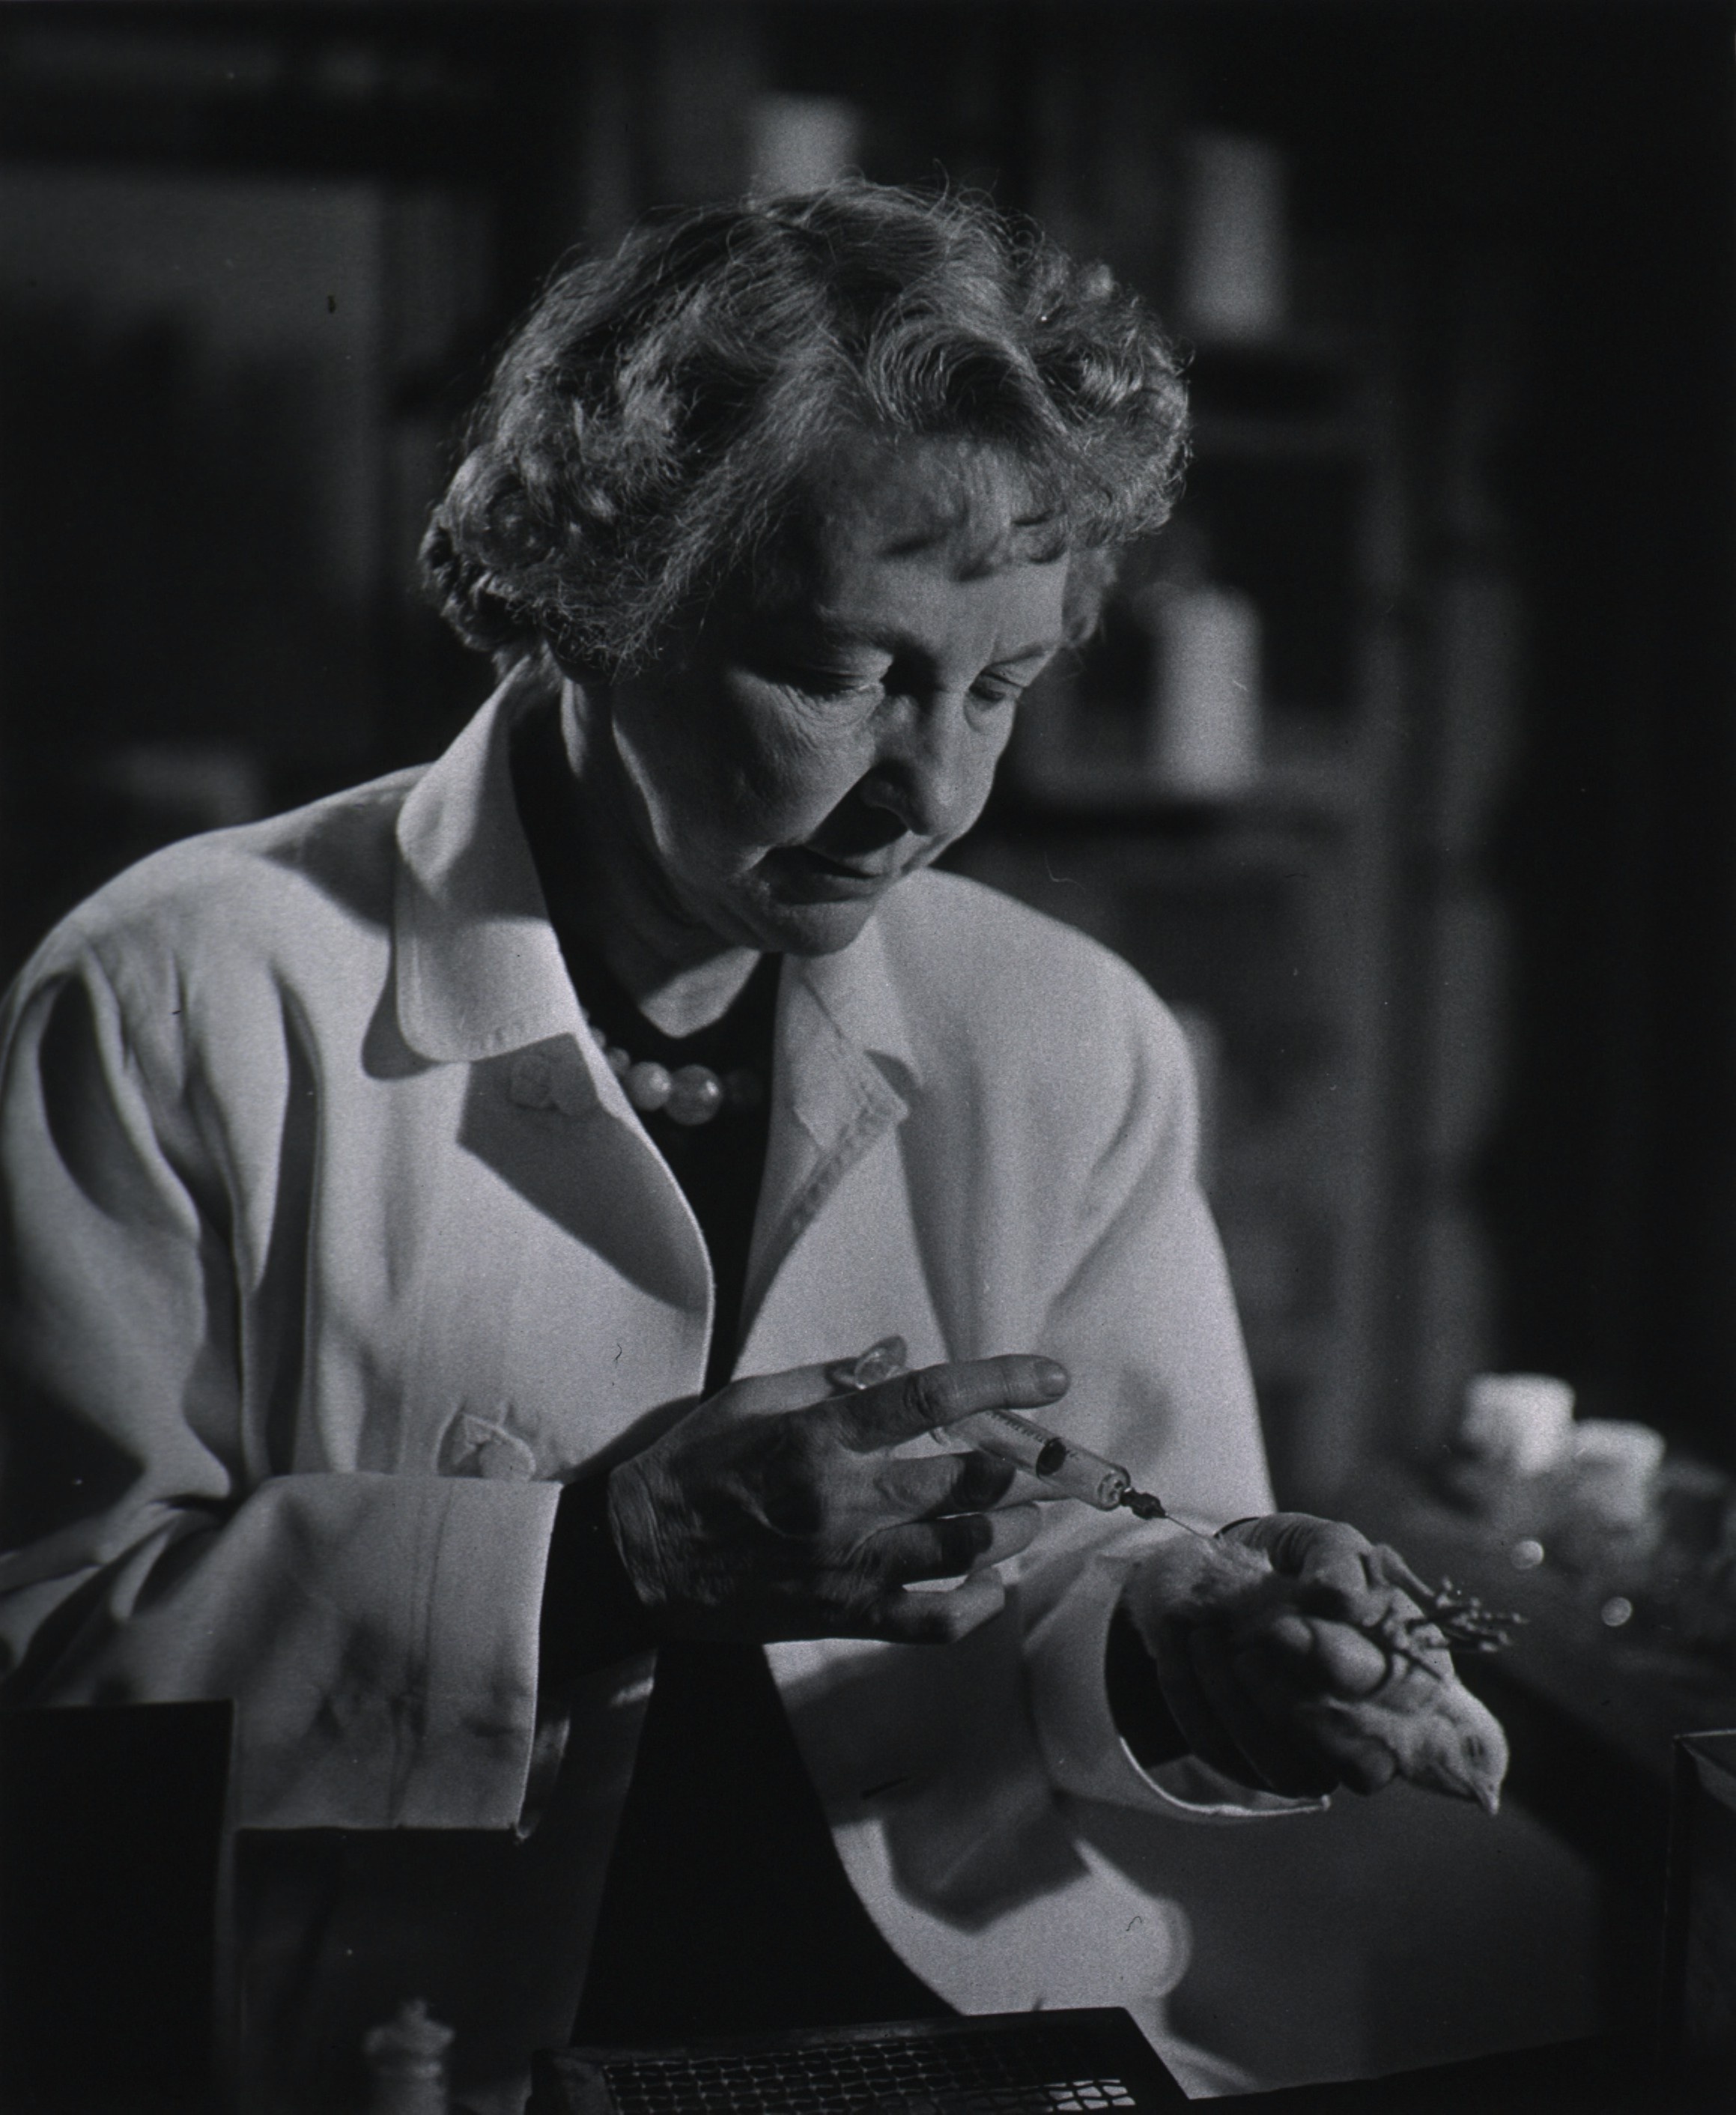 Photo of Dr. Branham injecting a chick